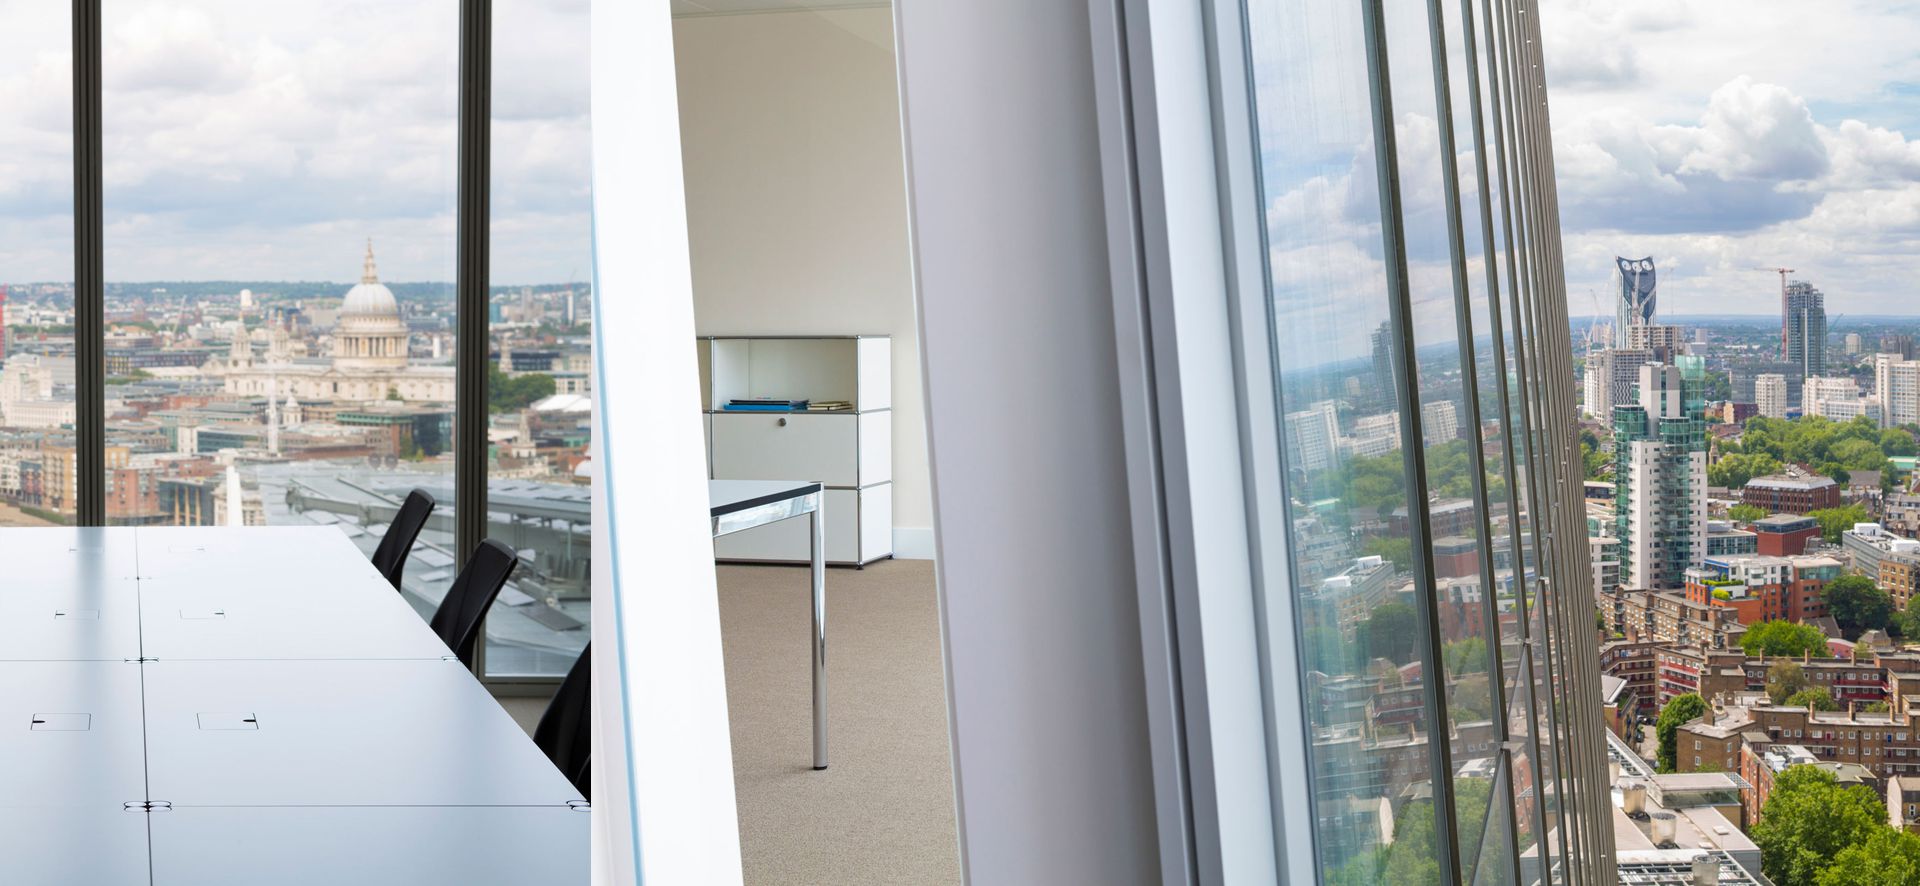 The Office Group – SHARD in London 2